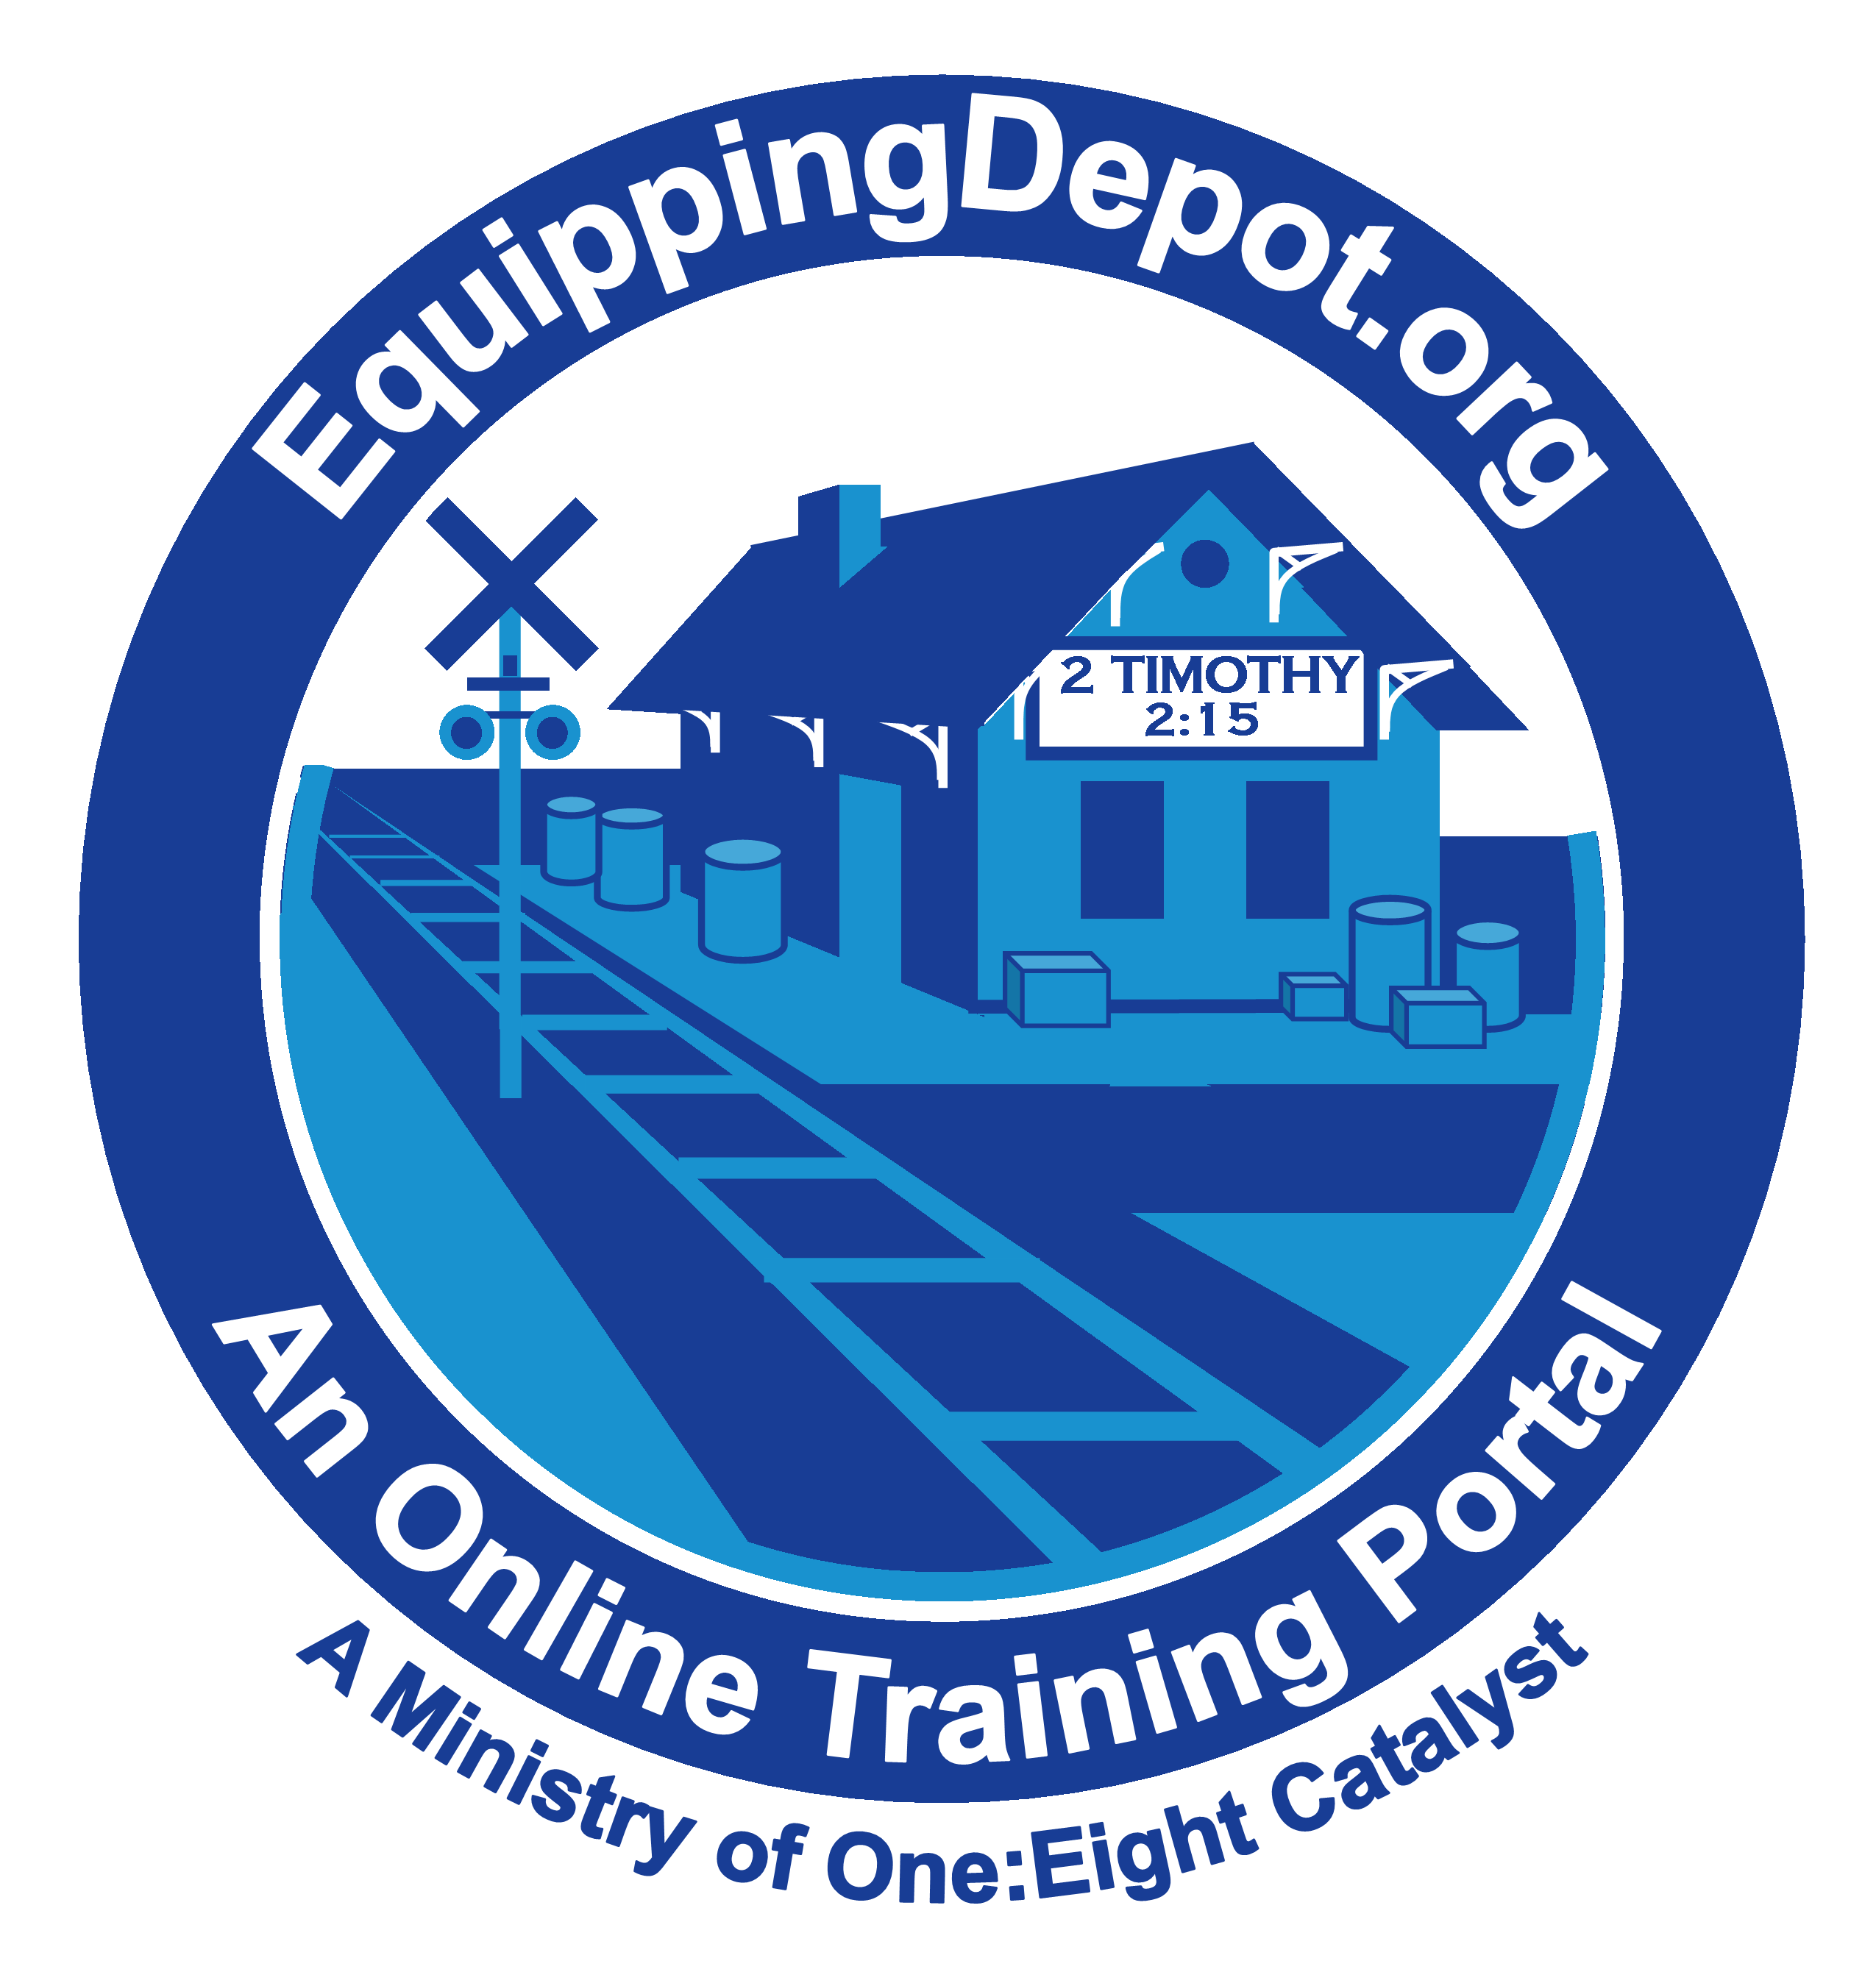 Equipping Depot